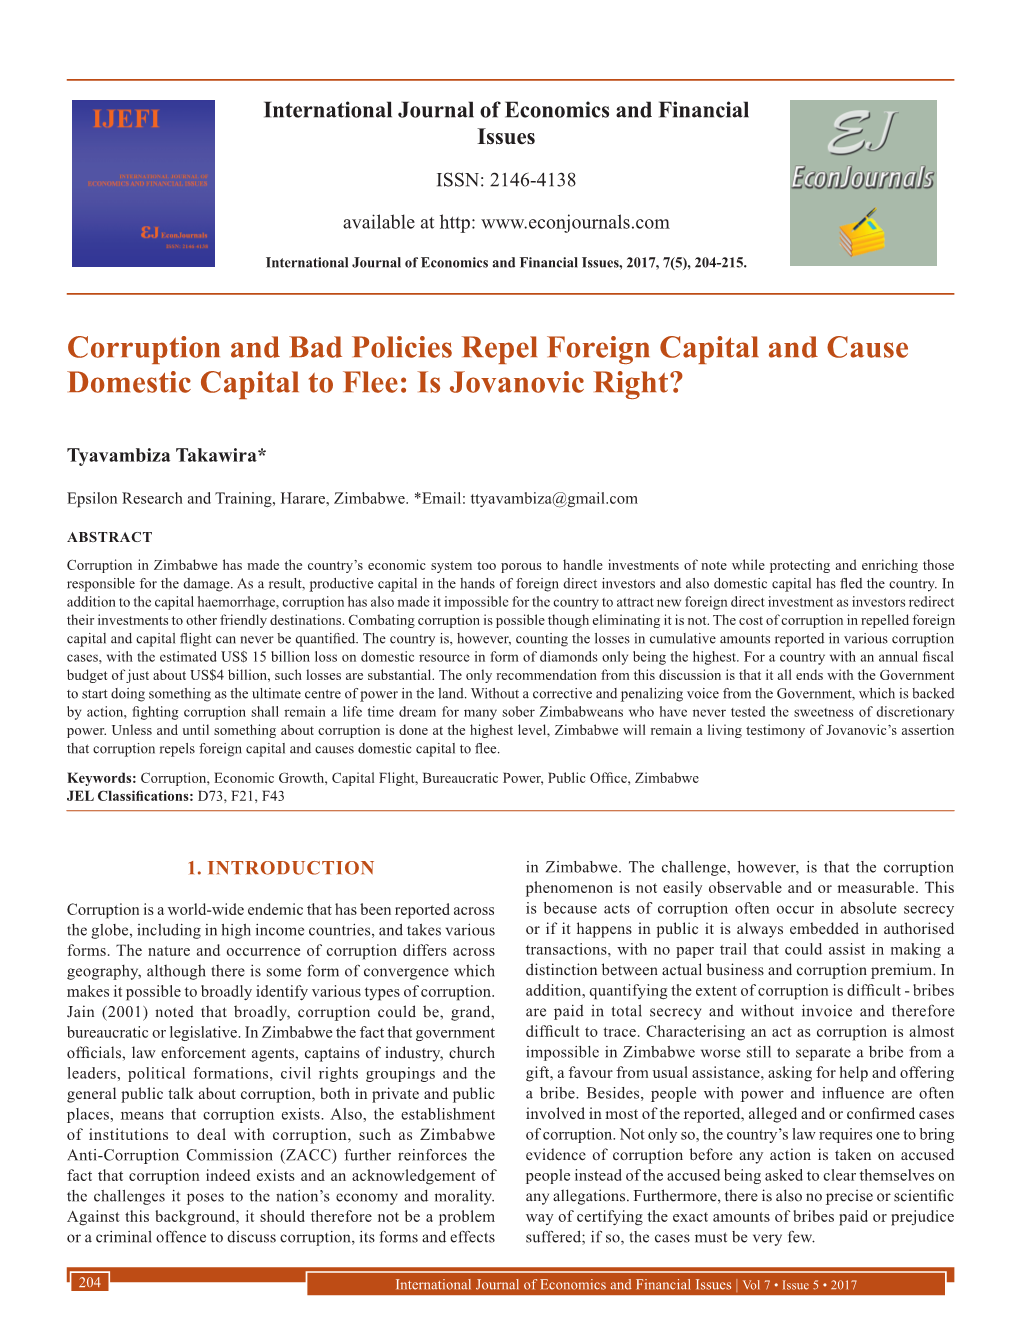 Corruption and Bad Policies Repel Foreign Capital and Cause Domestic Capital to Flee: Is Jovanovic Right?